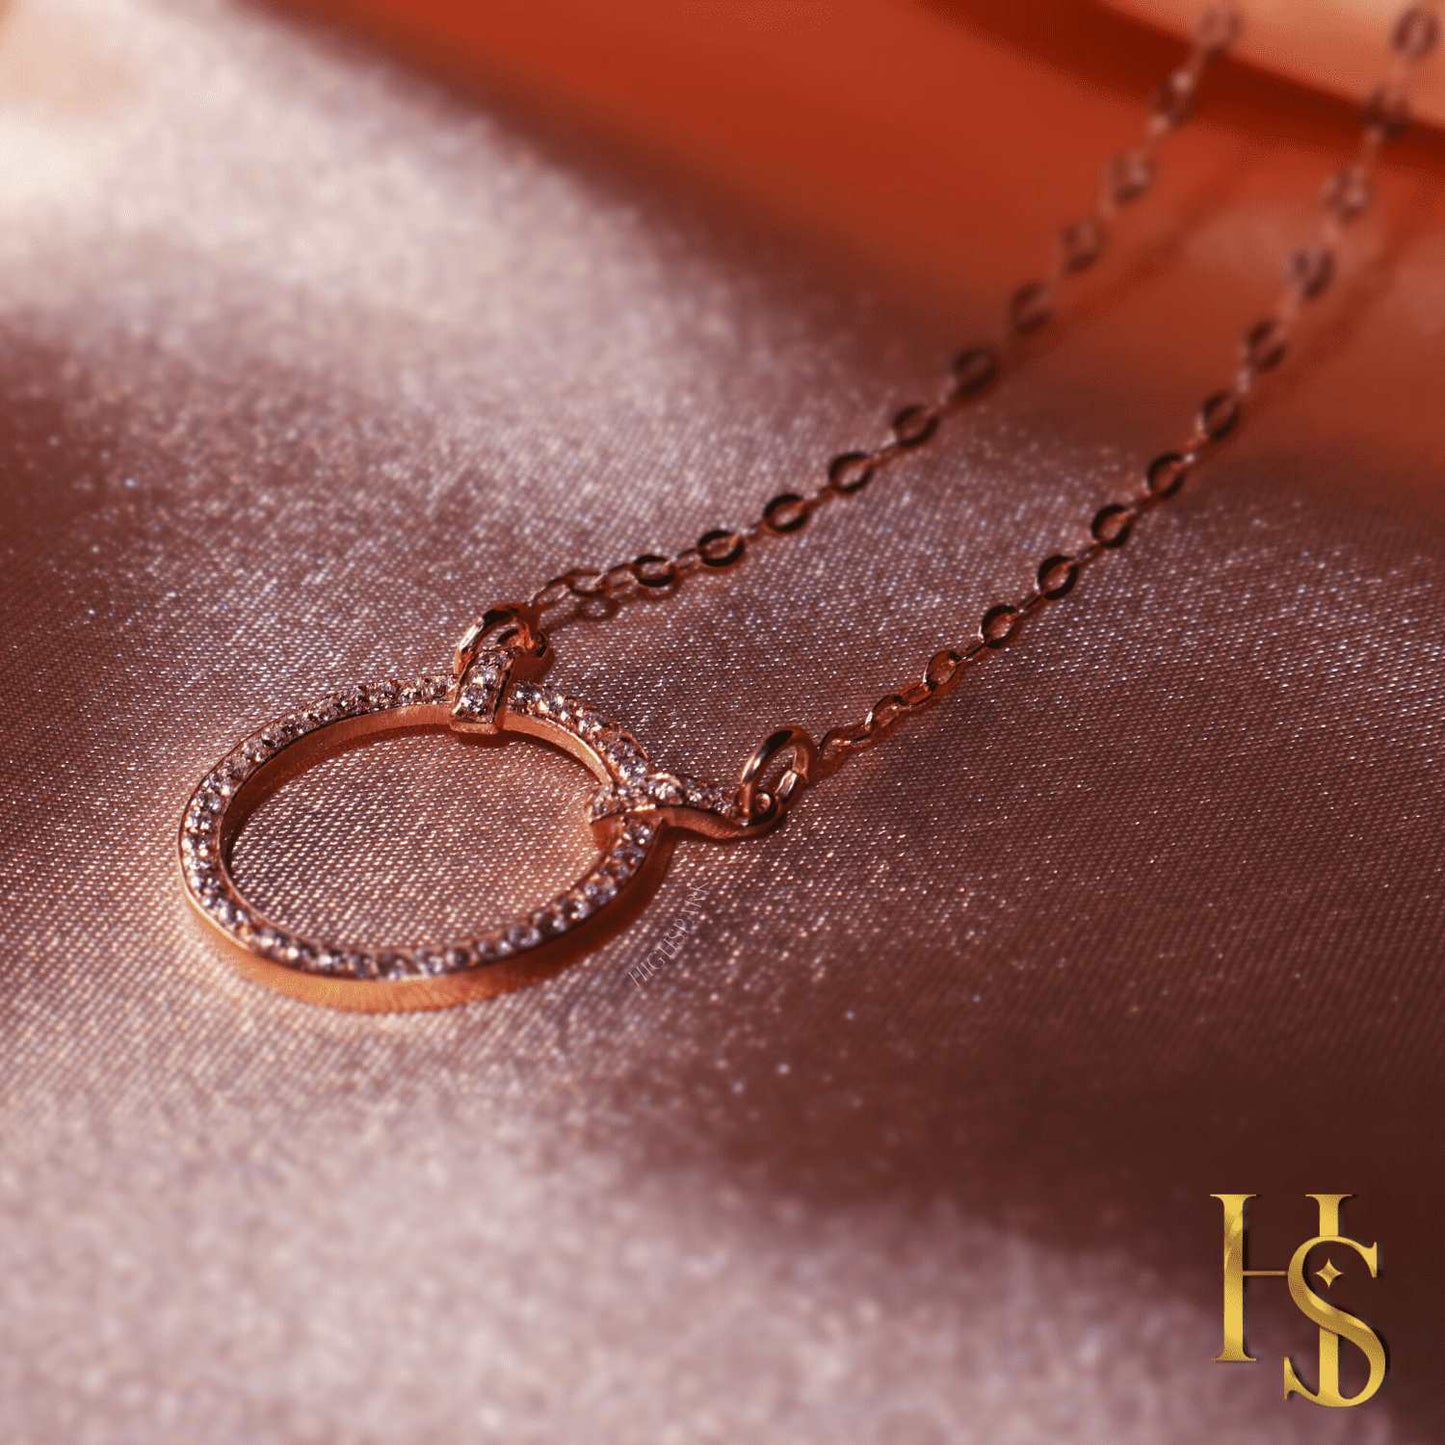 Circle of Life Celebrity Necklace in 92.5 Silver 18k Rose Gold finish - Studded with Swiss Zirconia Unity, Wholeness and Completeness